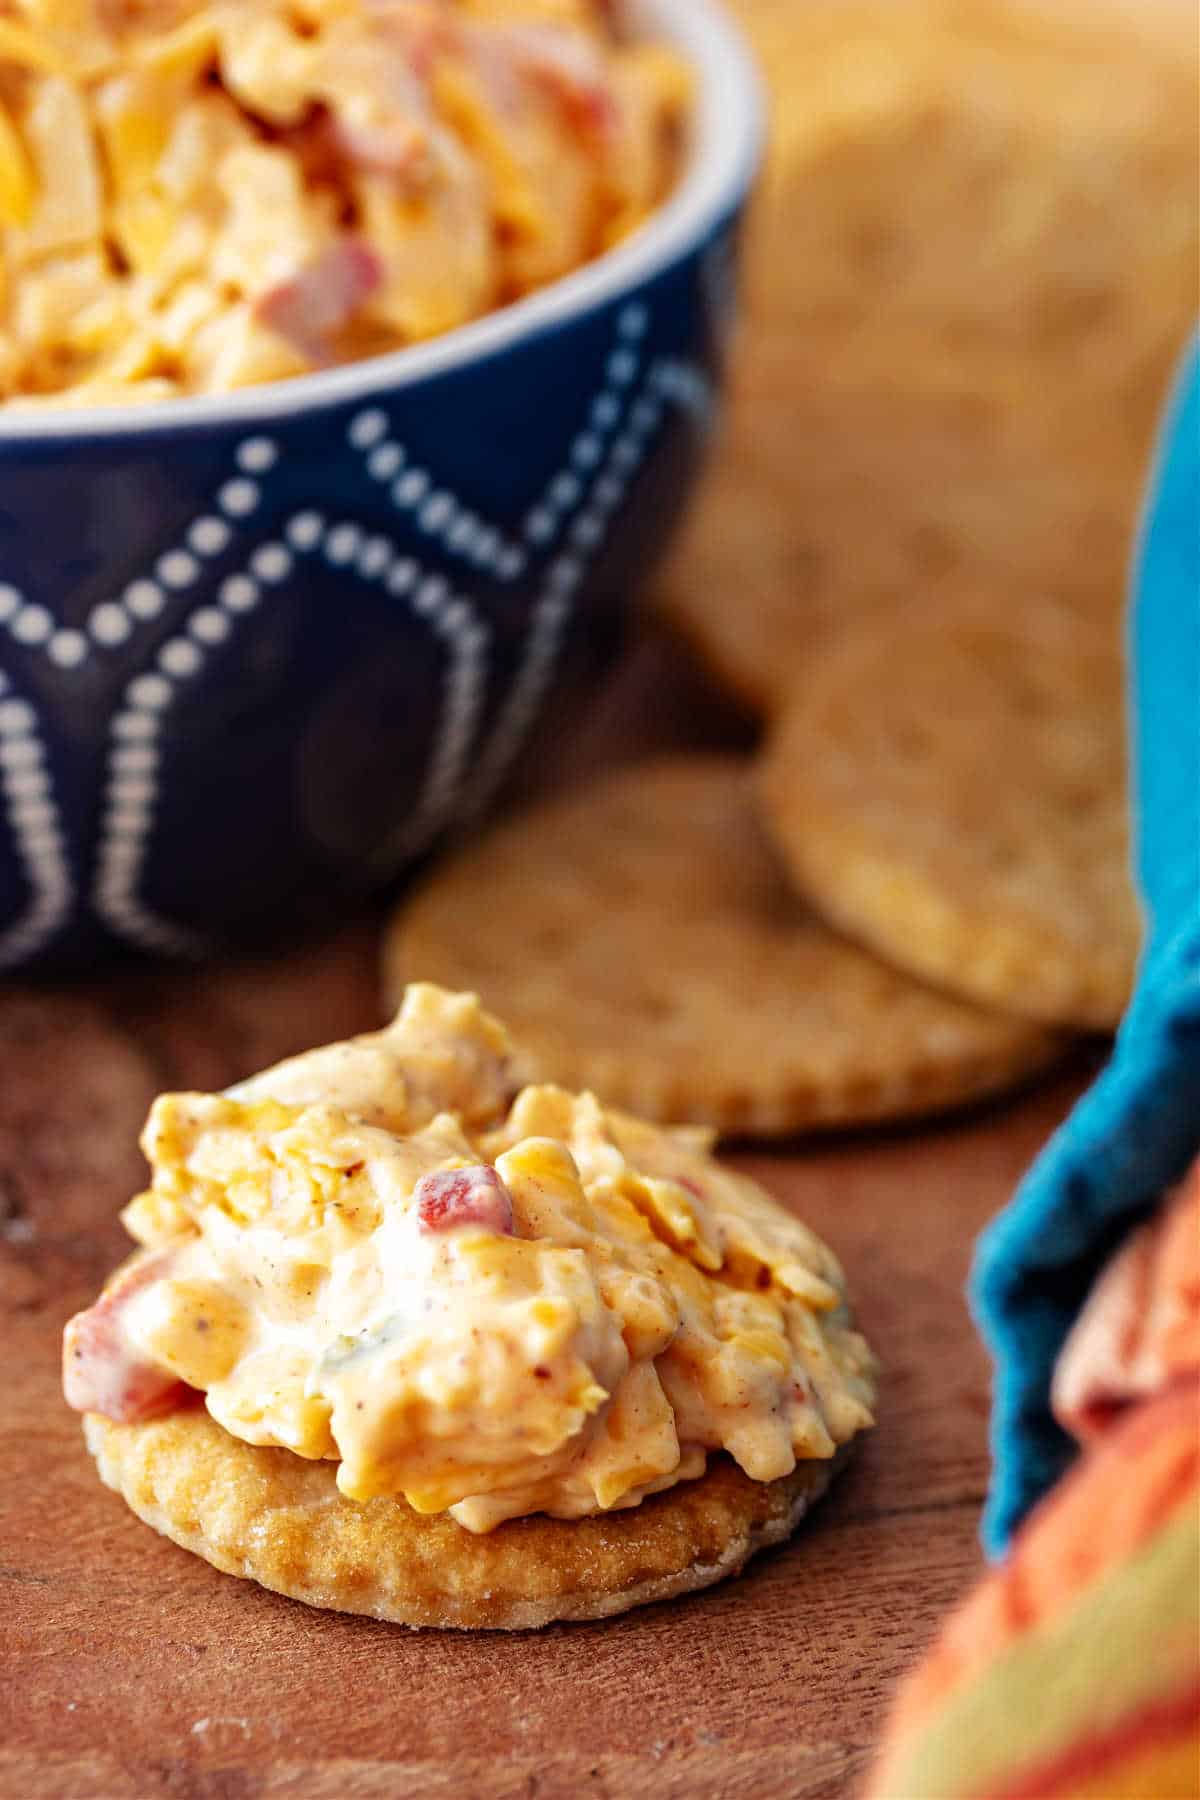 A cracker with a dollop of pimento cheese on top. There is also a blue bowl with white dots to the back left, partially out of the frame, filled with more pimento cheese.